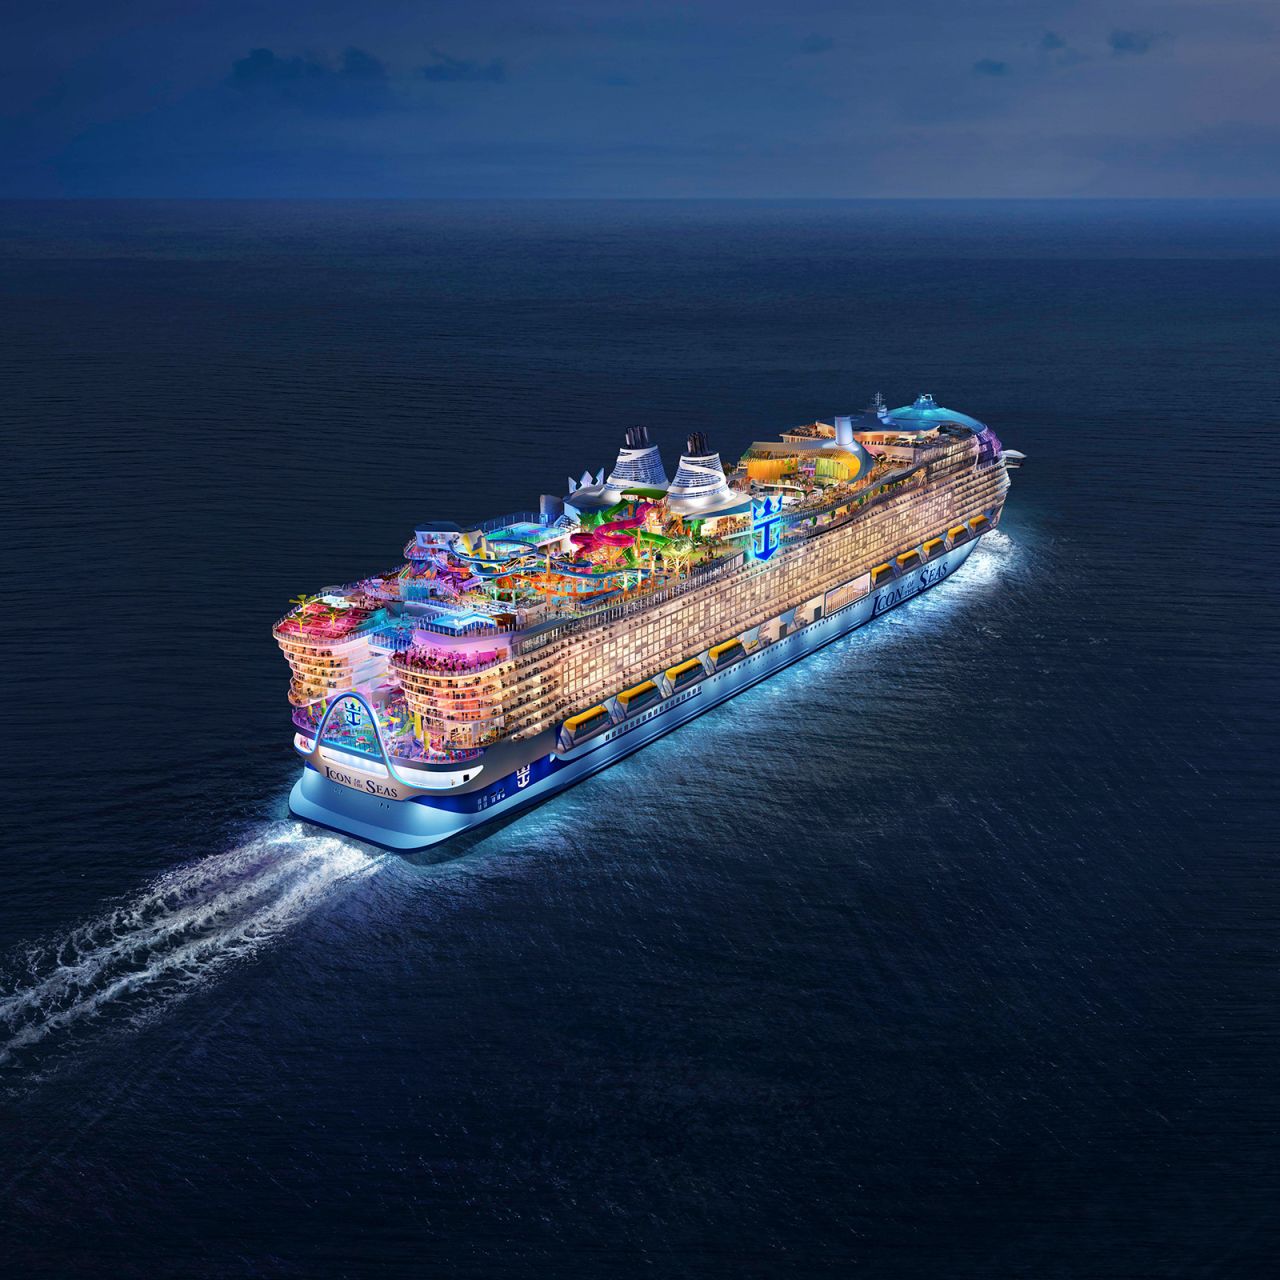 A rendering shows what the ship will look like when finished.